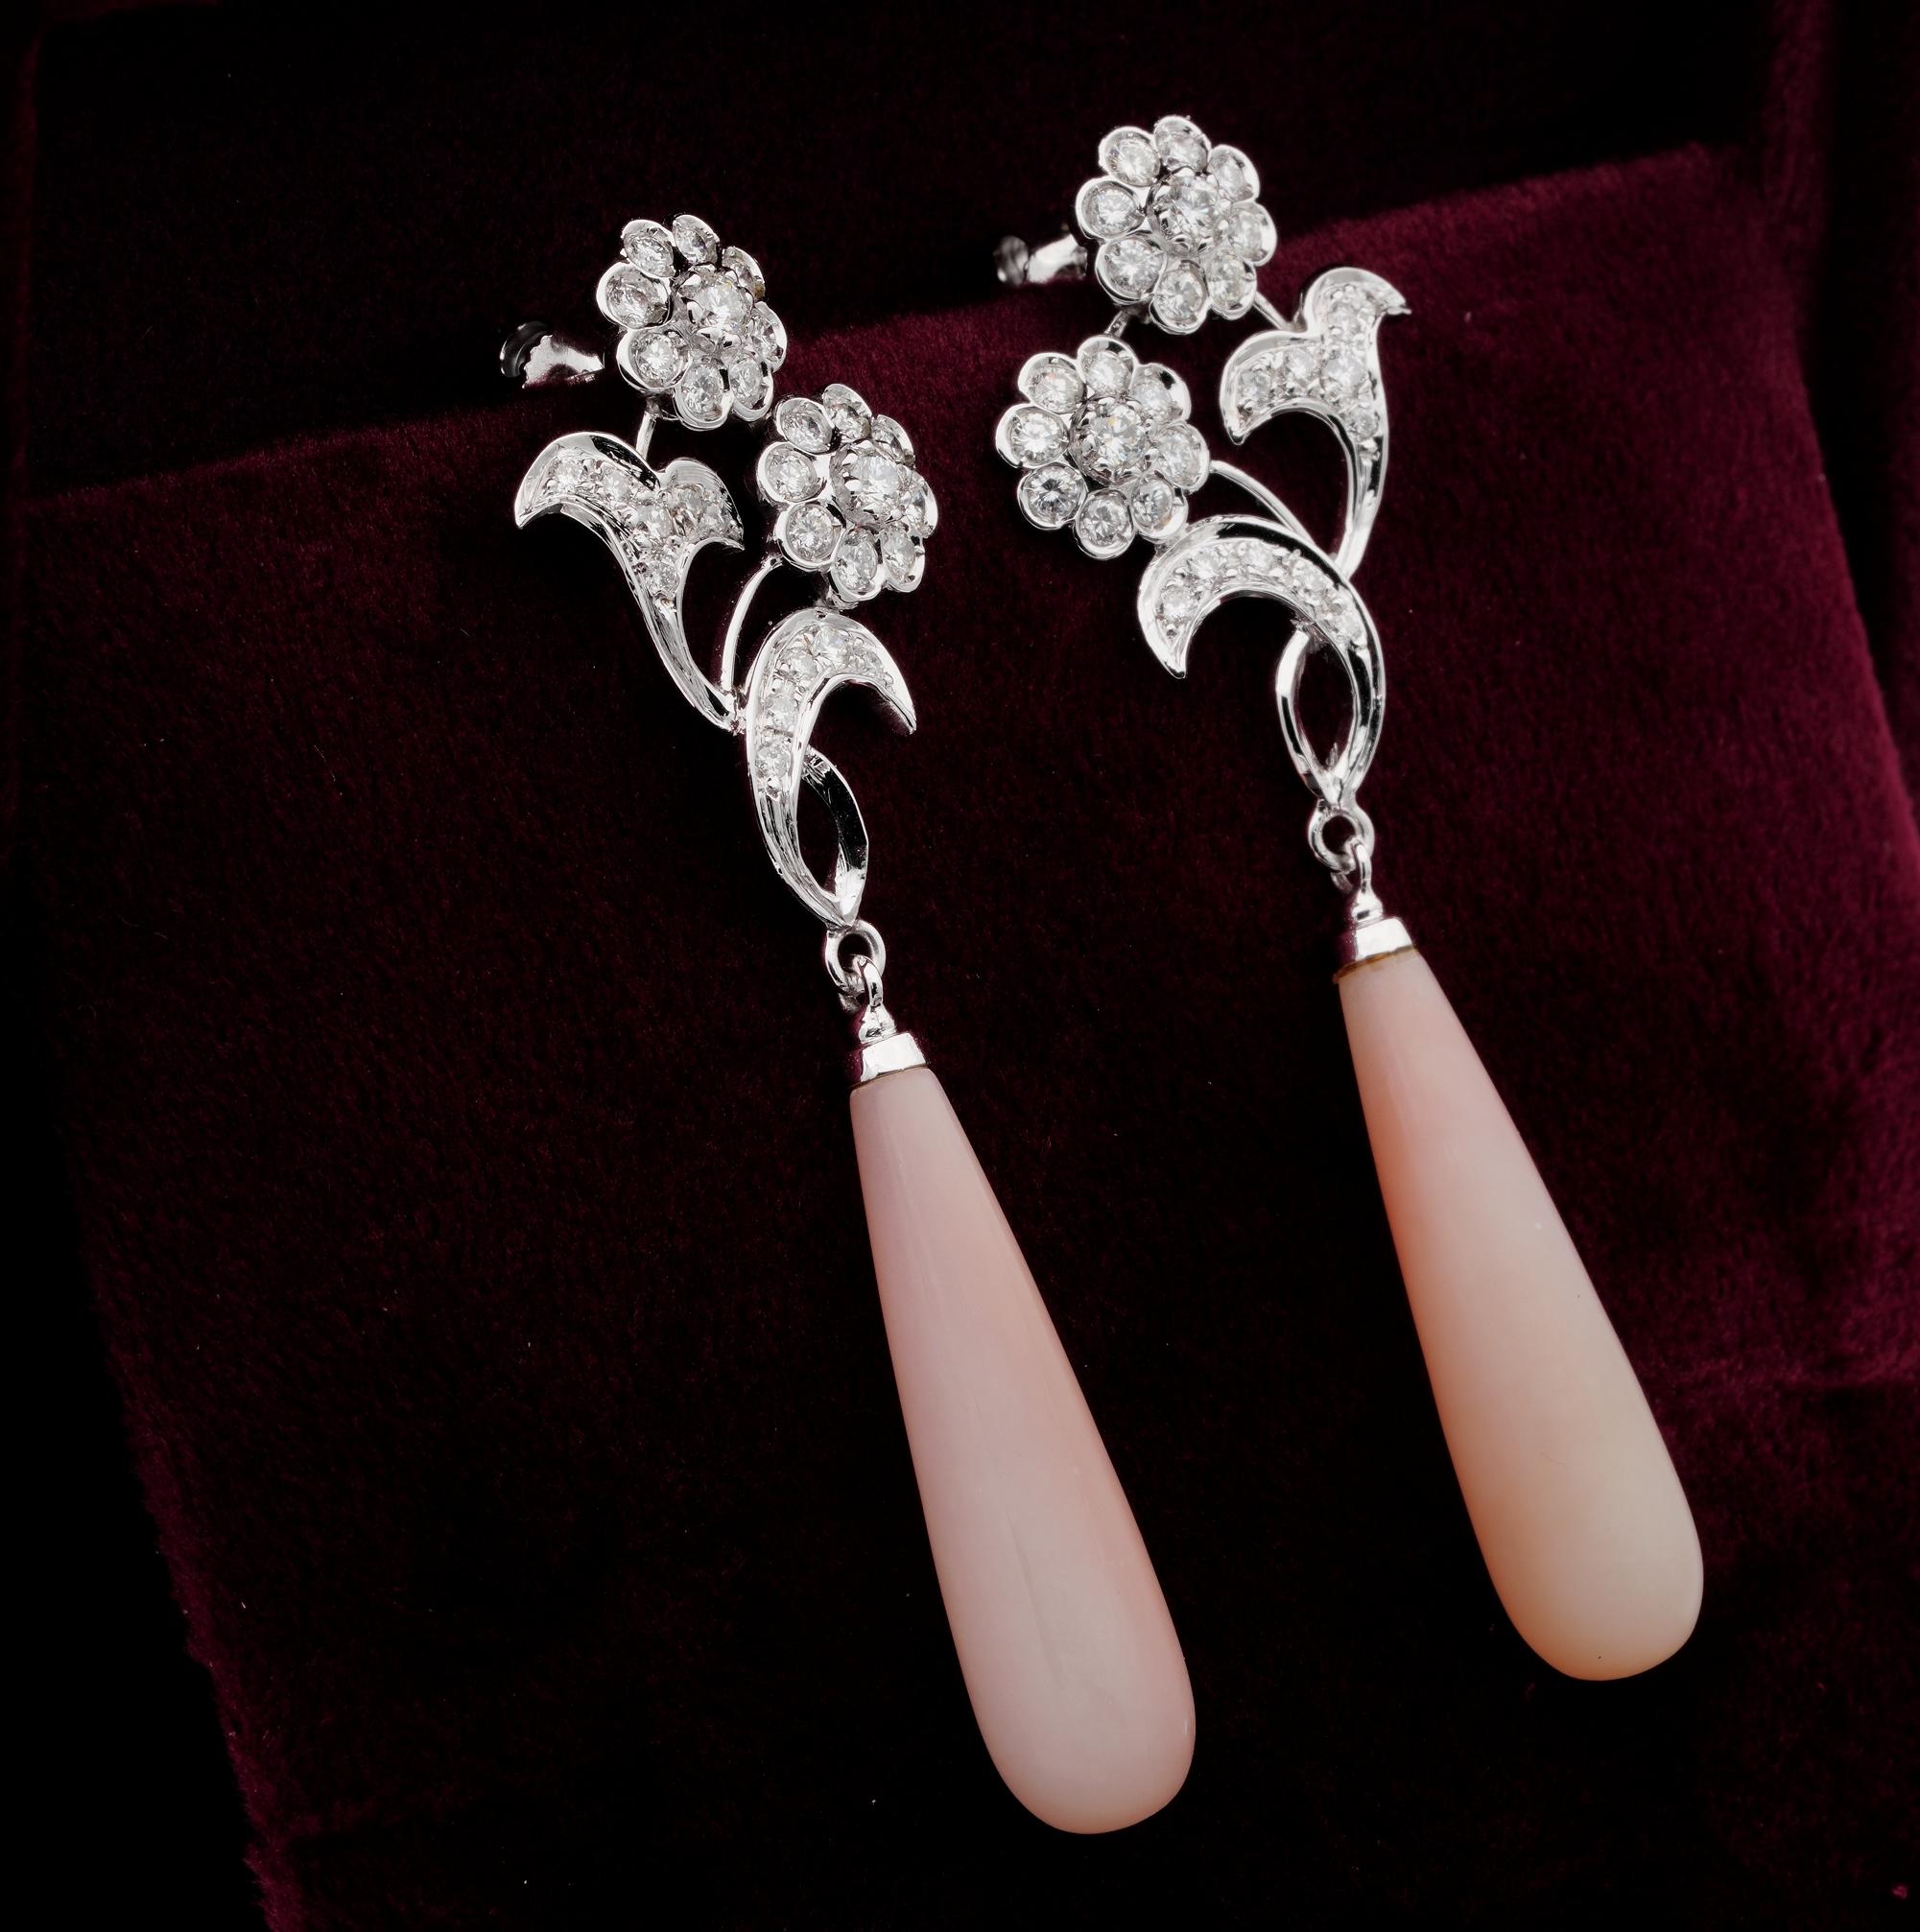 Beloved Pink
An exquisite pair of Natural Pink Opal & Diamond ear drops.
Stunning design, lovely Pink Pastel colour combined with dazzling Diamonds
Earrings are very much Art Nouveau inspired with a delightful group of flower with leaf work